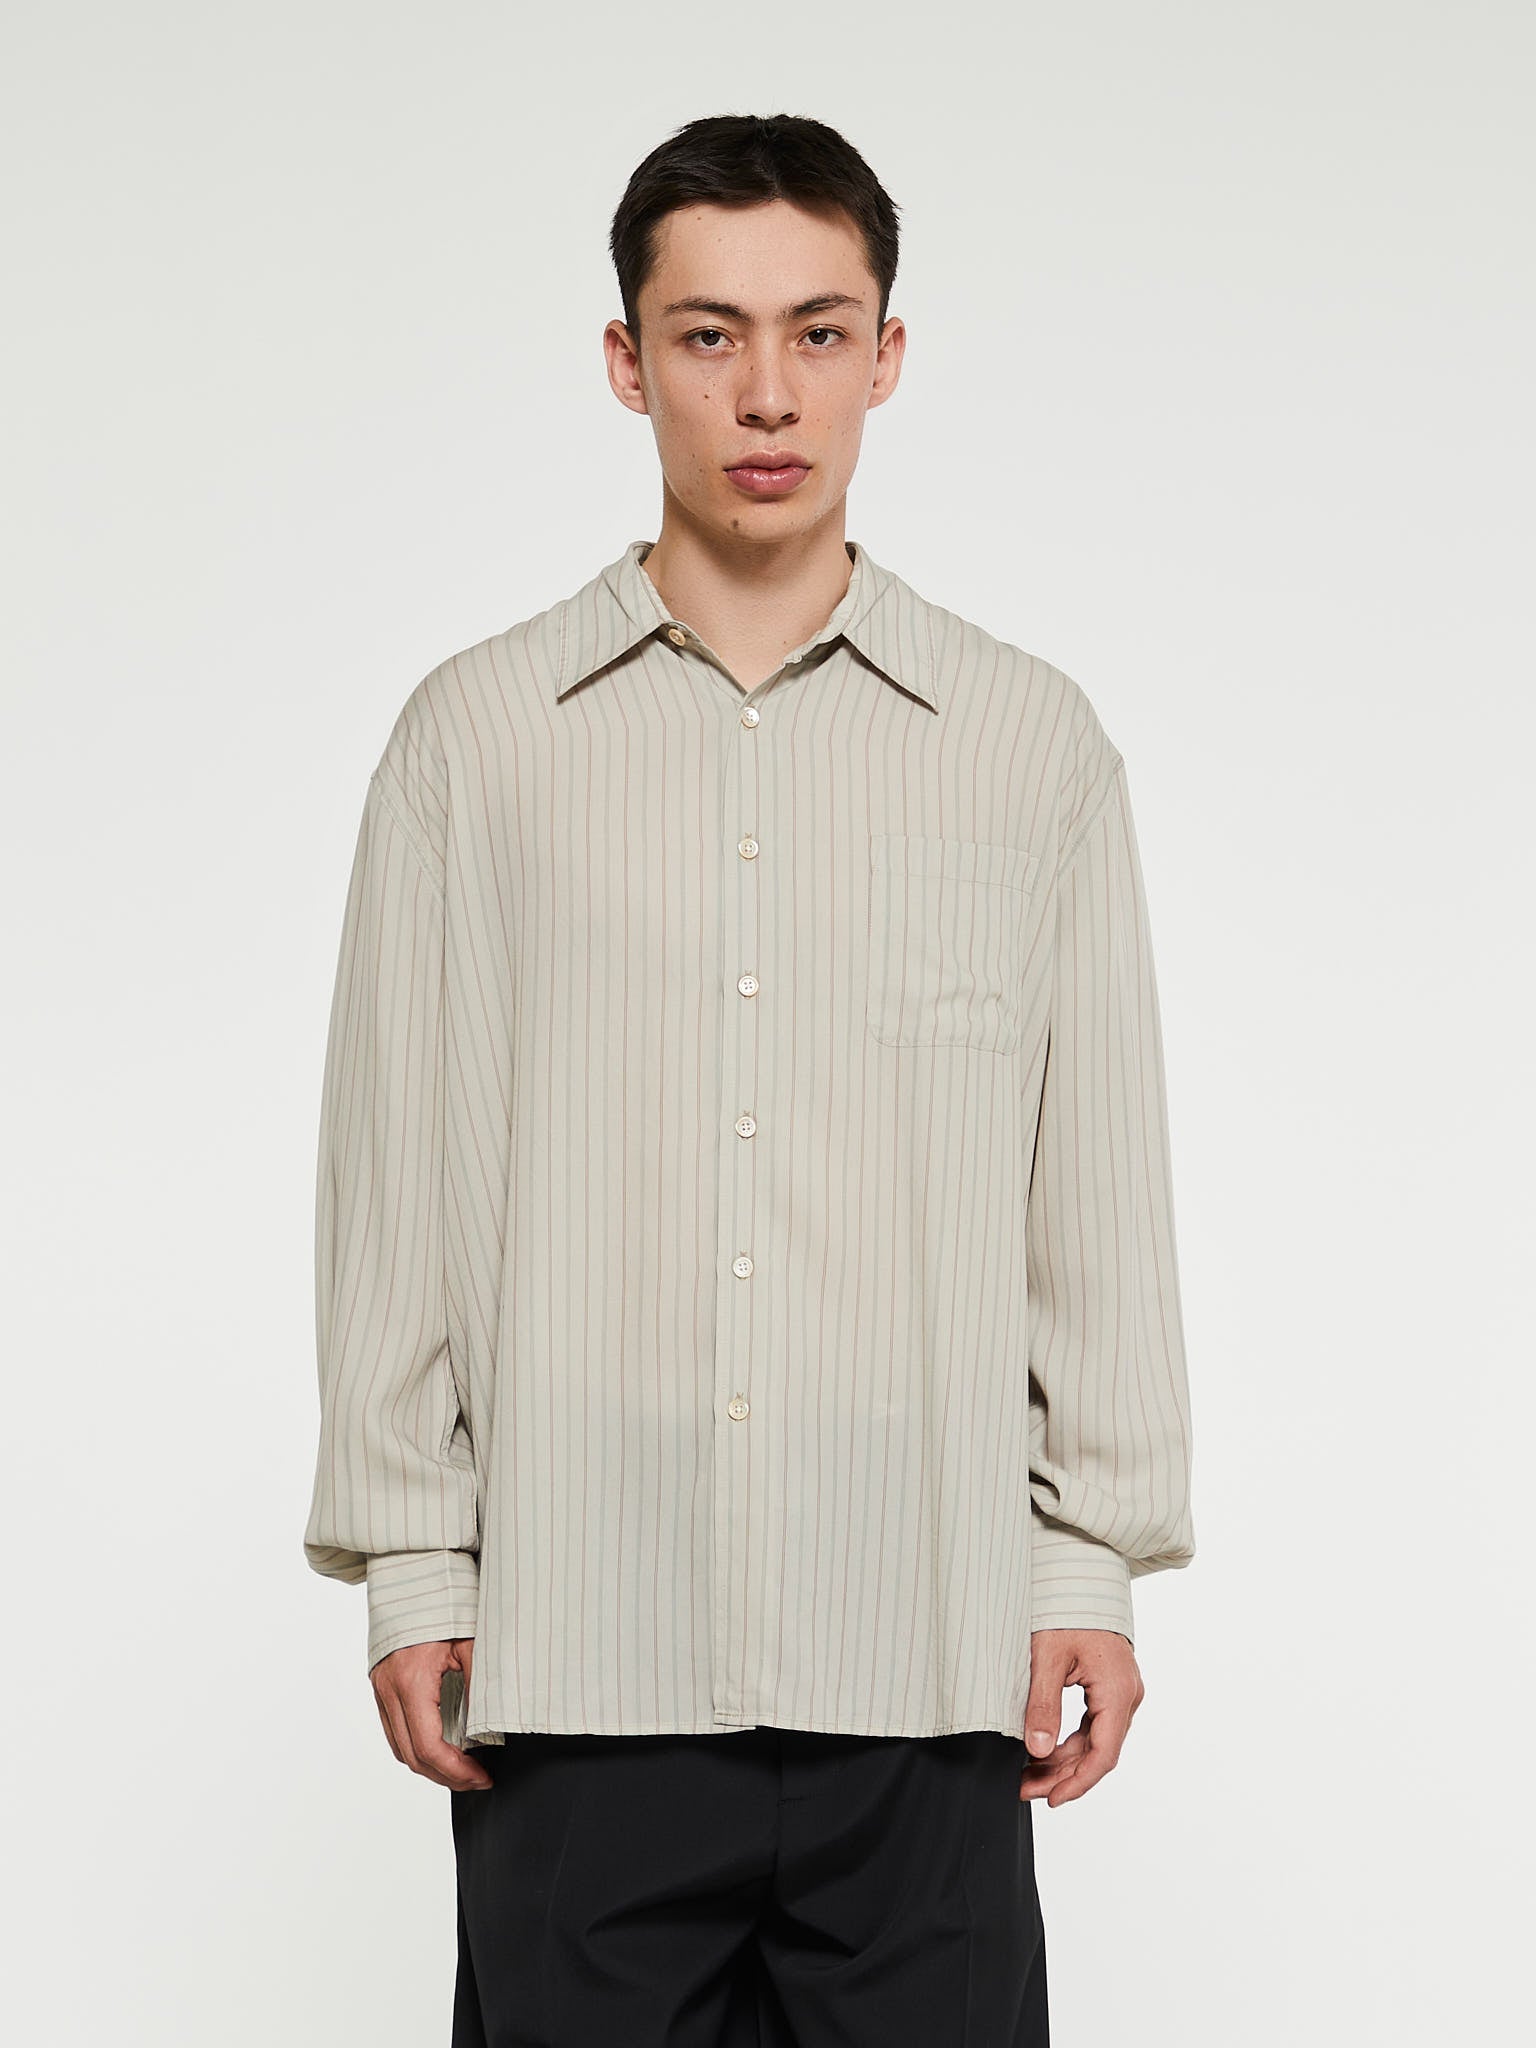 Above Shirt in Beige Stripes